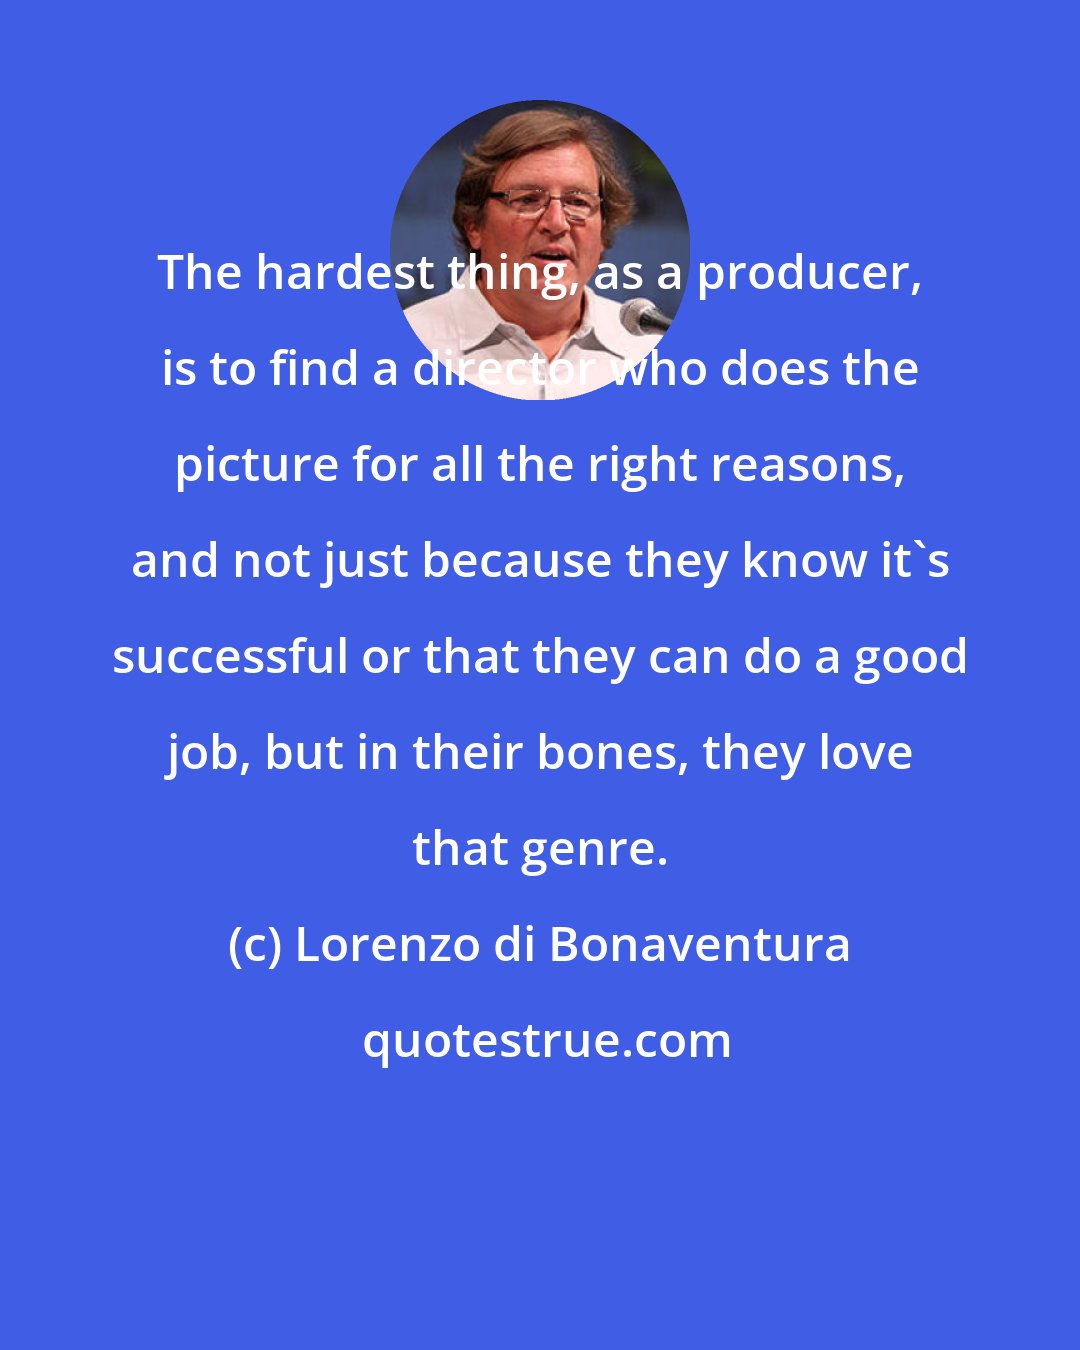 Lorenzo di Bonaventura: The hardest thing, as a producer, is to find a director who does the picture for all the right reasons, and not just because they know it's successful or that they can do a good job, but in their bones, they love that genre.